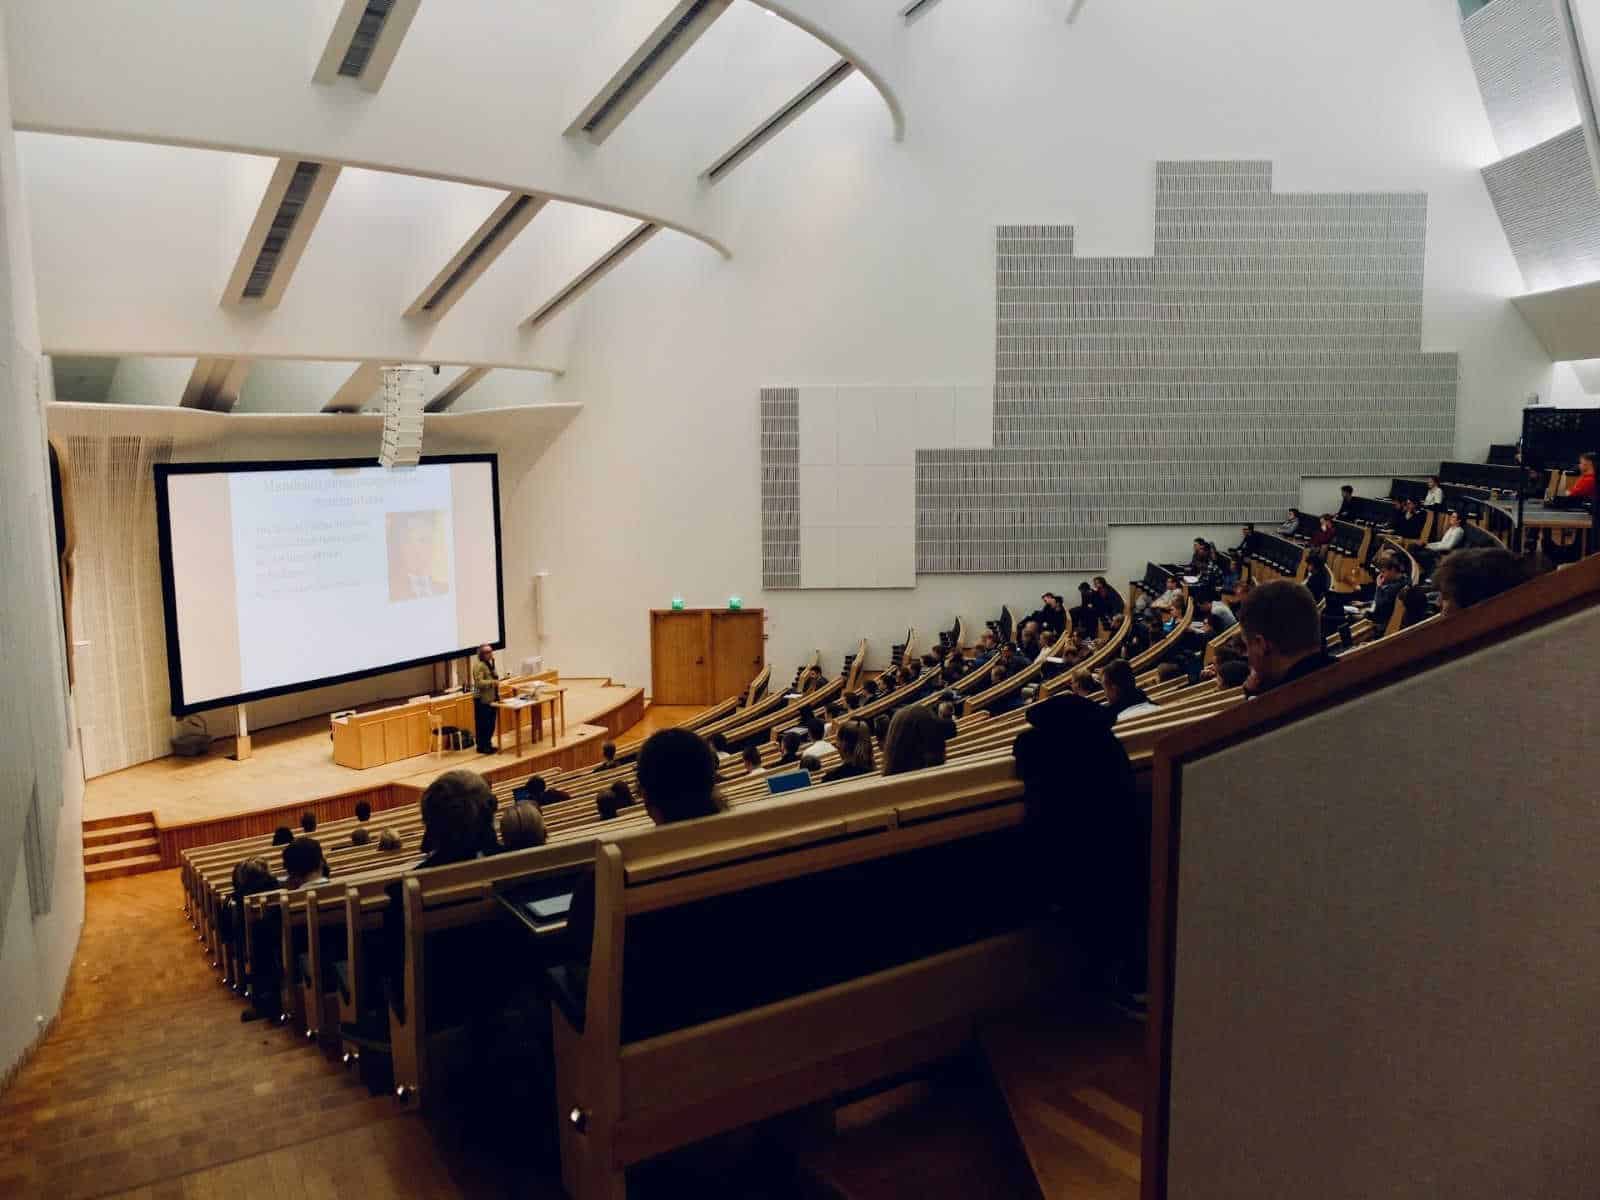 auditorium with people listening to a lecturer at the front